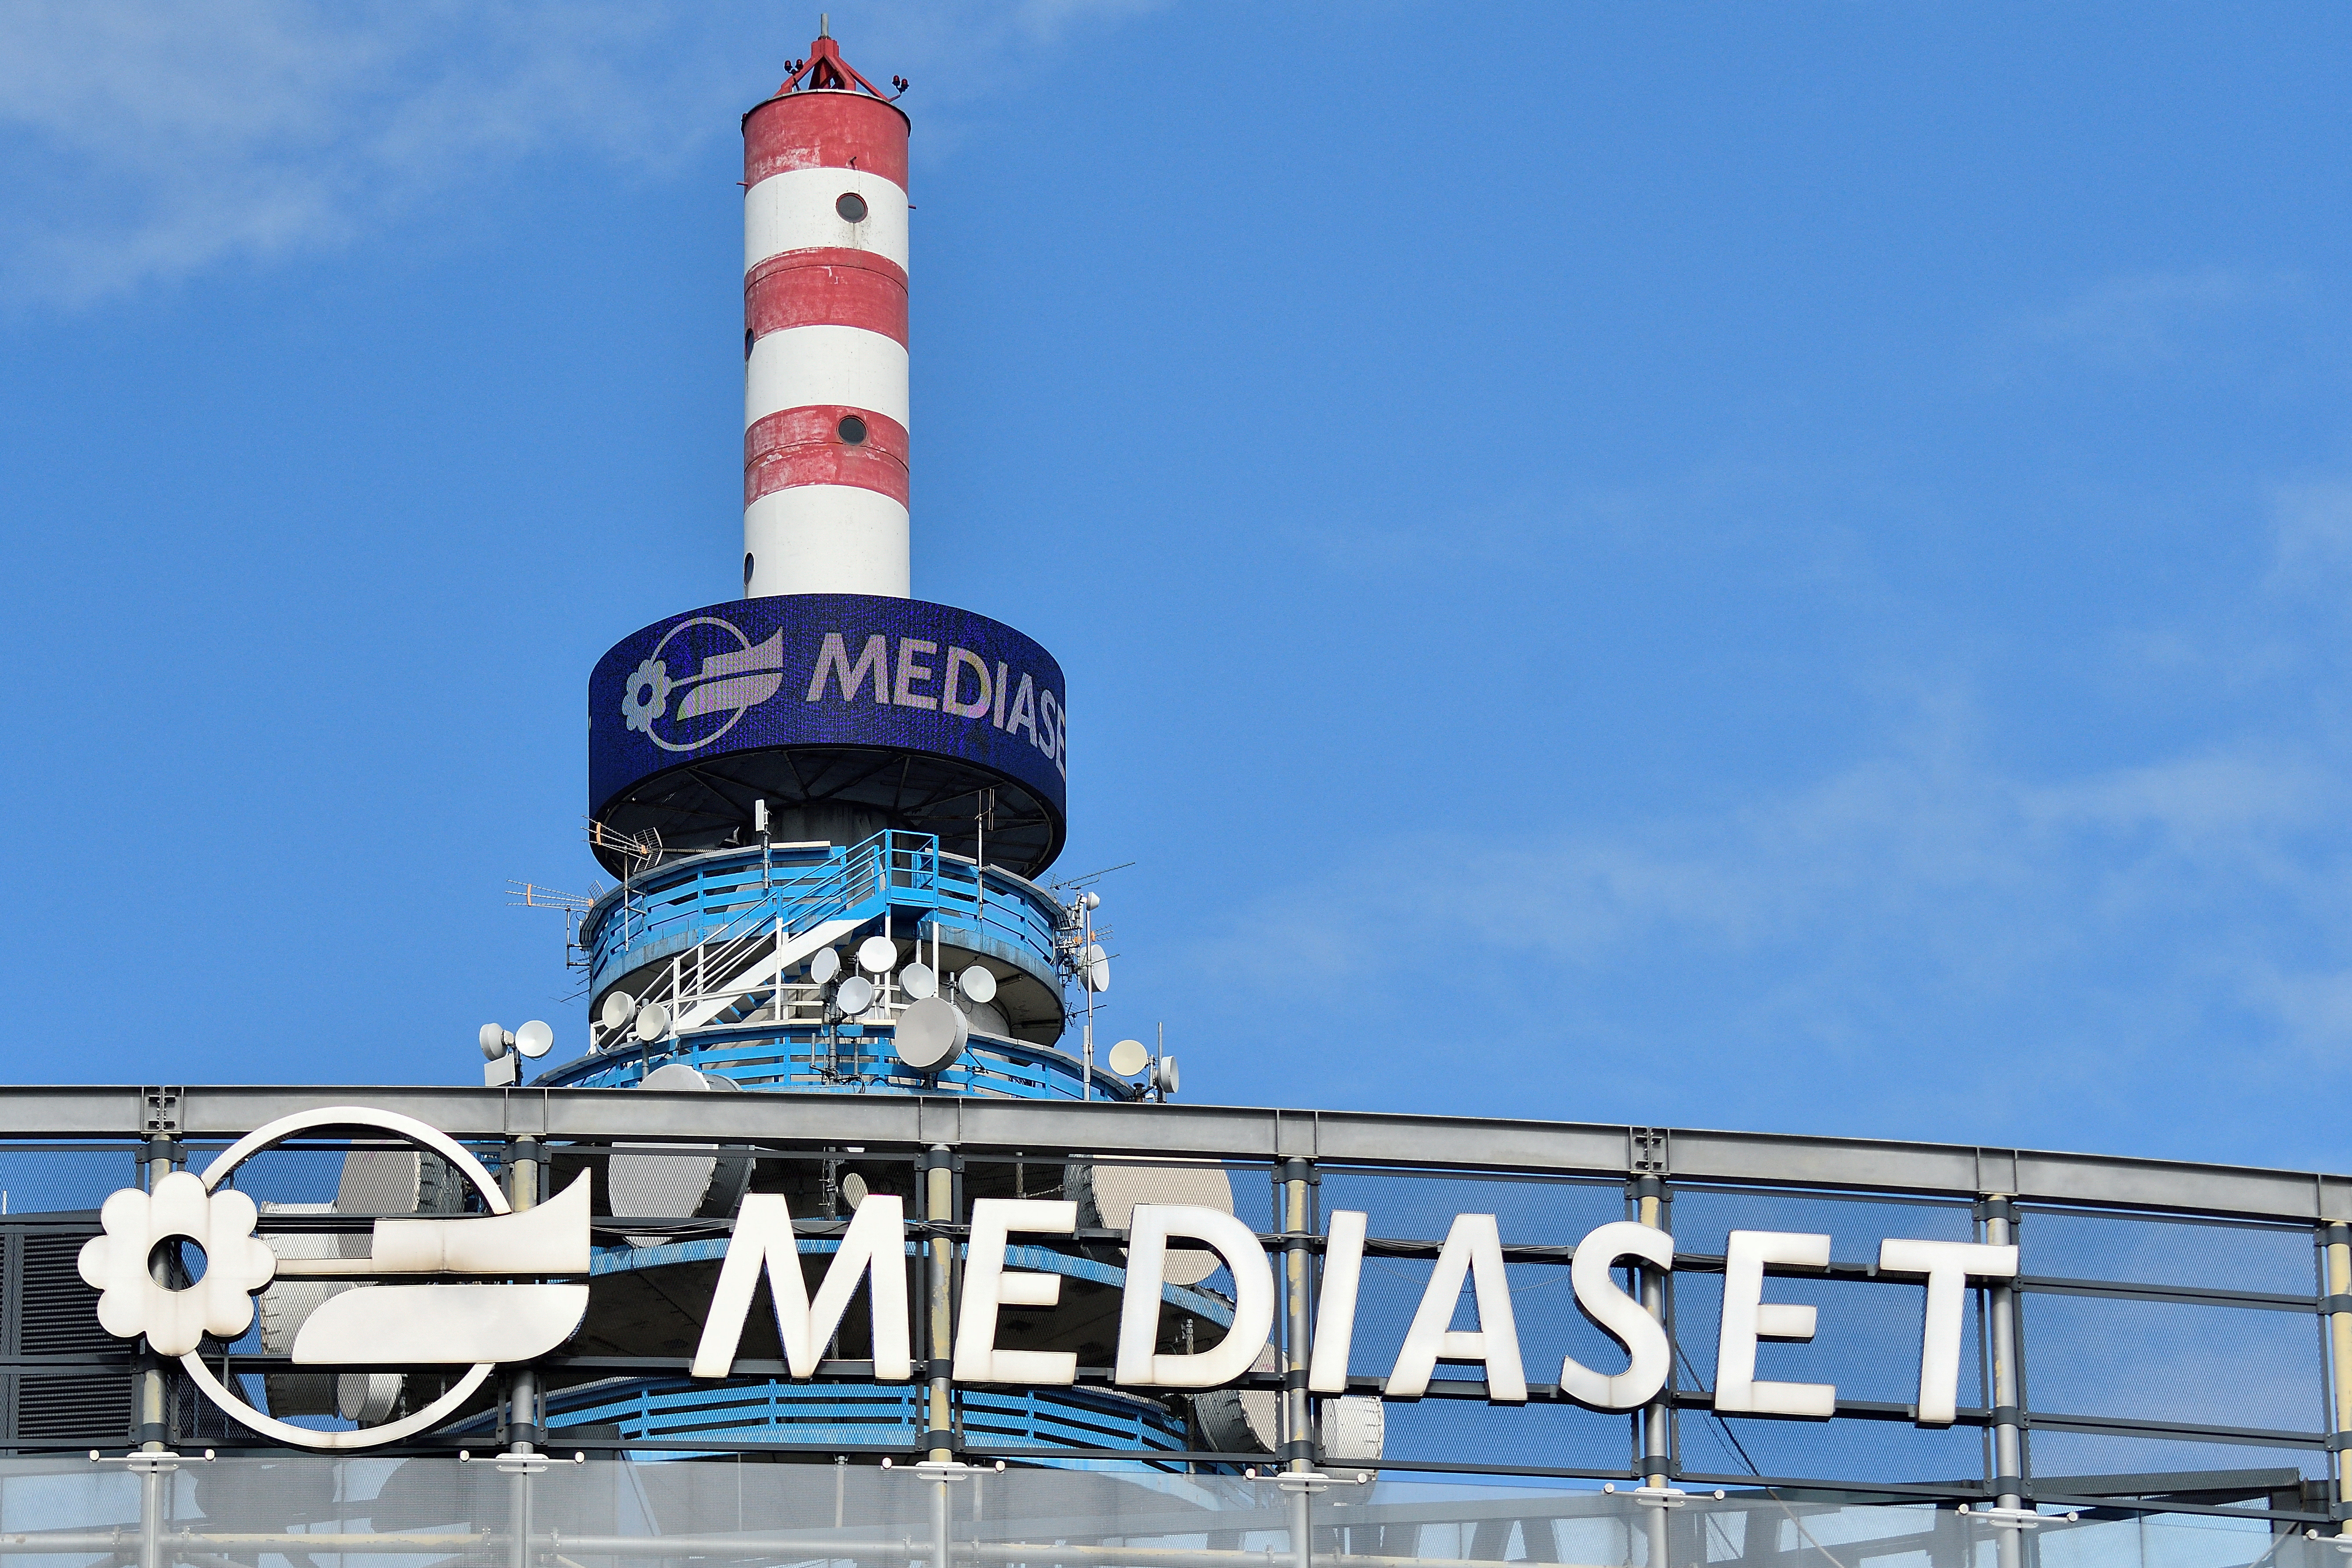 The Mediaset tower is seen in the headquarters ahead of the commercial broadcaster's annual general meeting in Cologno Monzese